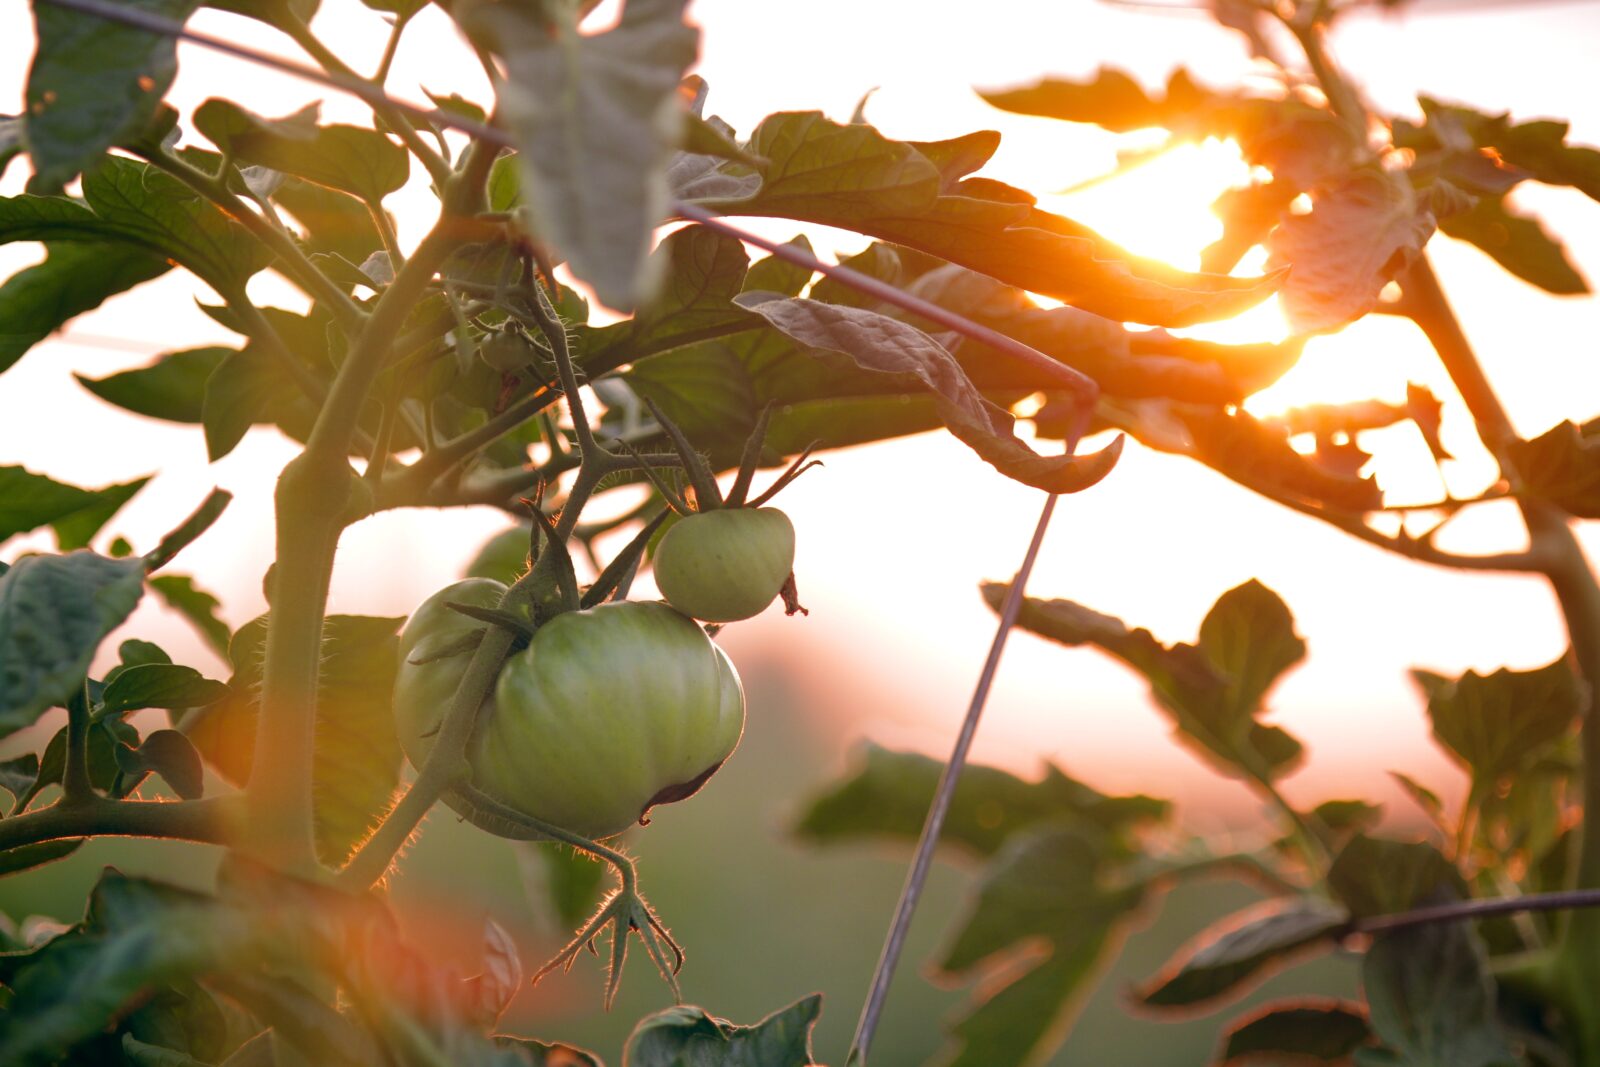 Finding the right Florida garden microclimates for growing tomatoes year round